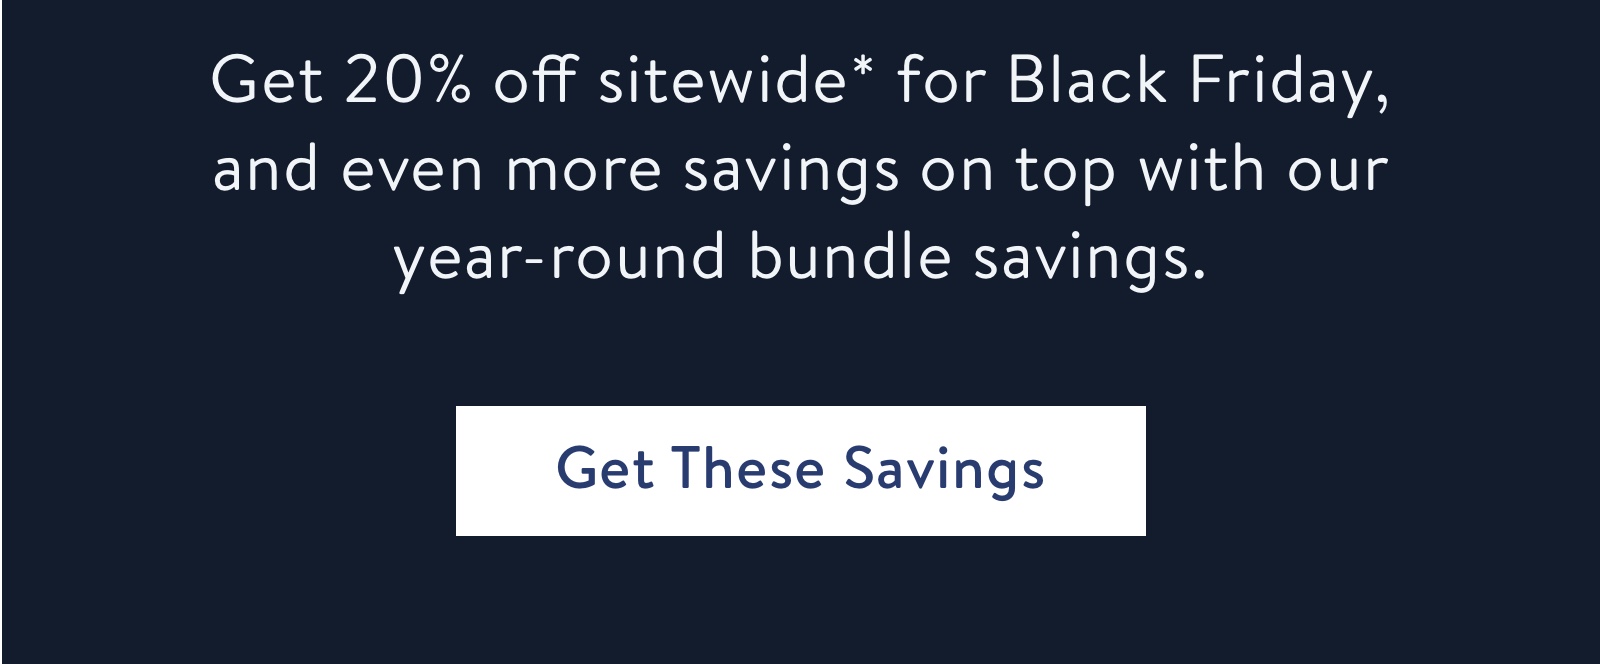 Get 20% off sitewide* for Black Friday, and even more savings on top with our year round bundle savings.